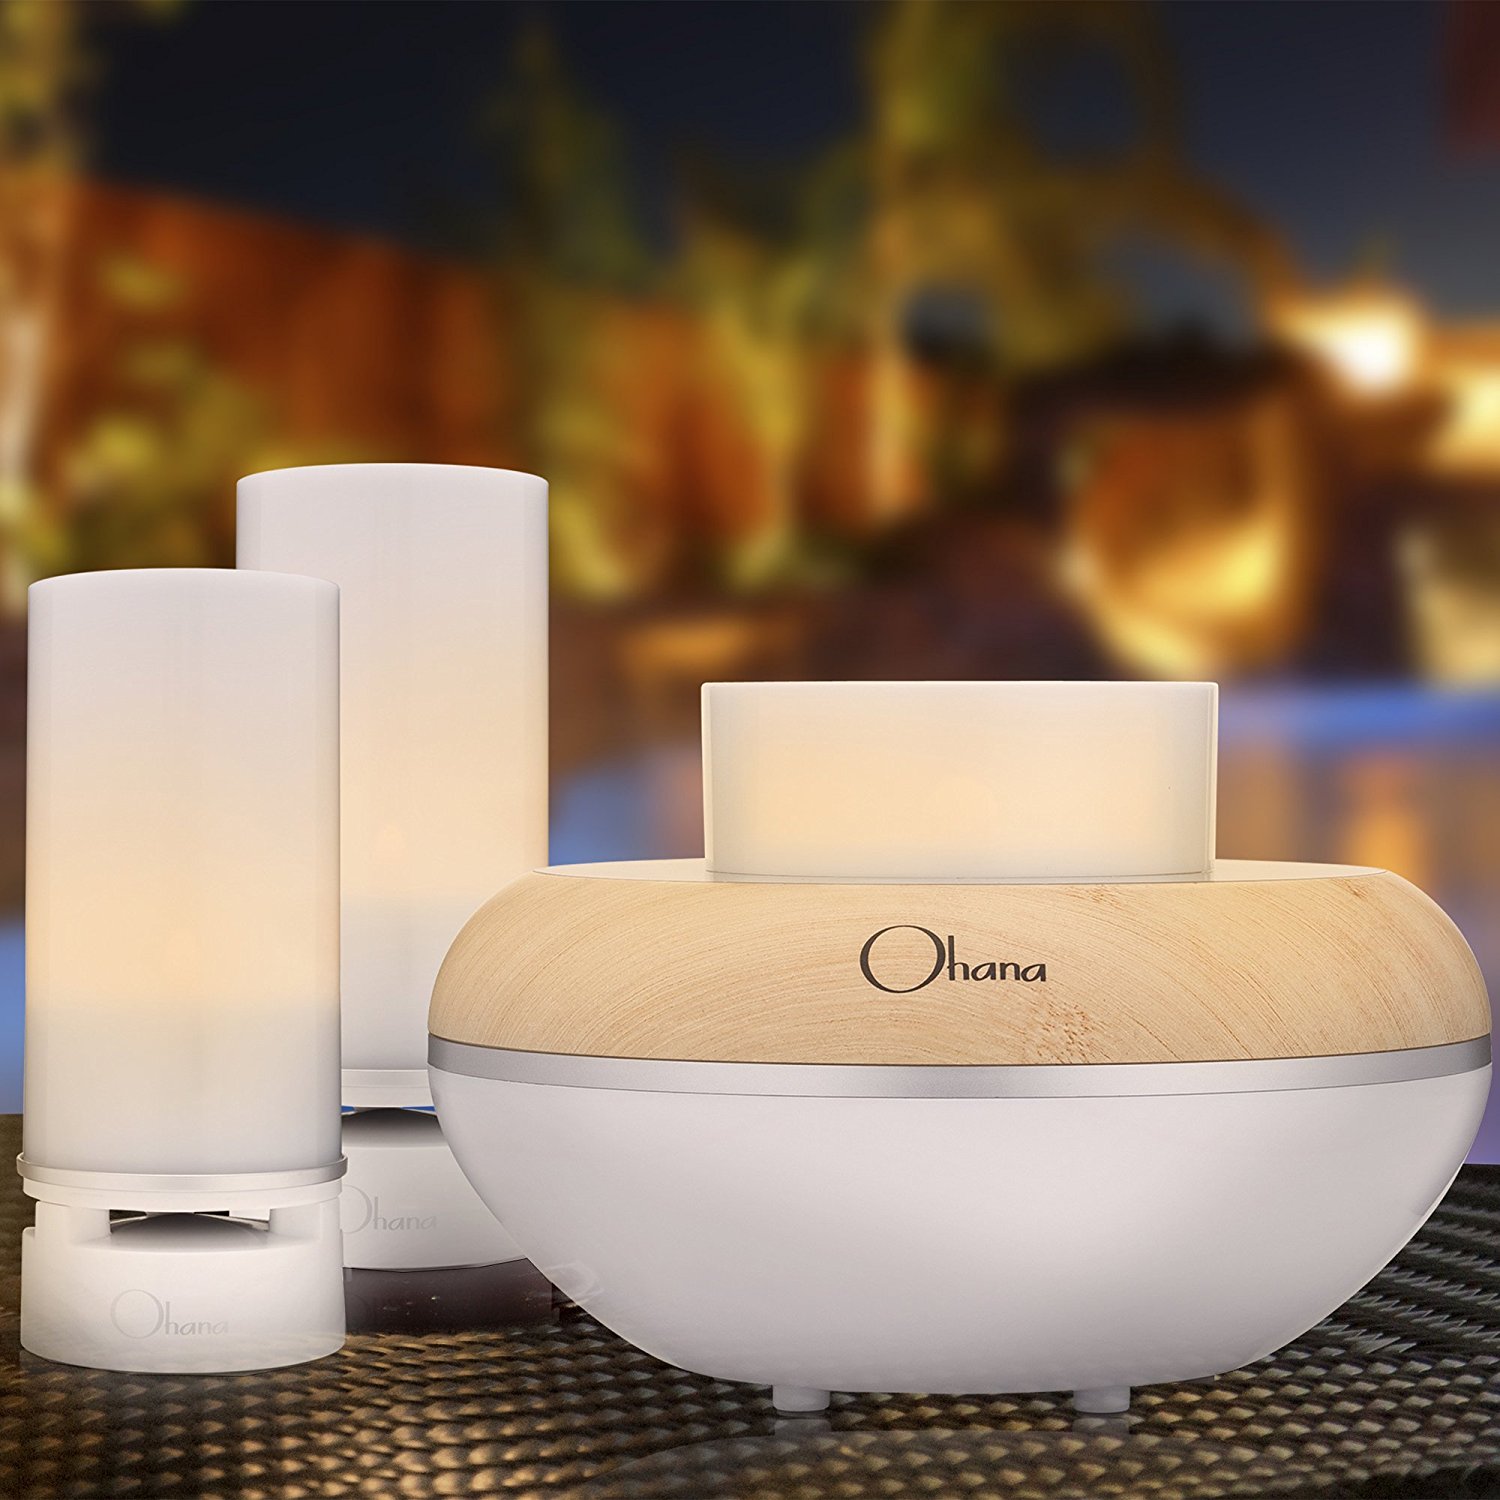 Today only: Save $80 on the Bem Ohana 3-piece indoor/outdoor Bluetooth audio system